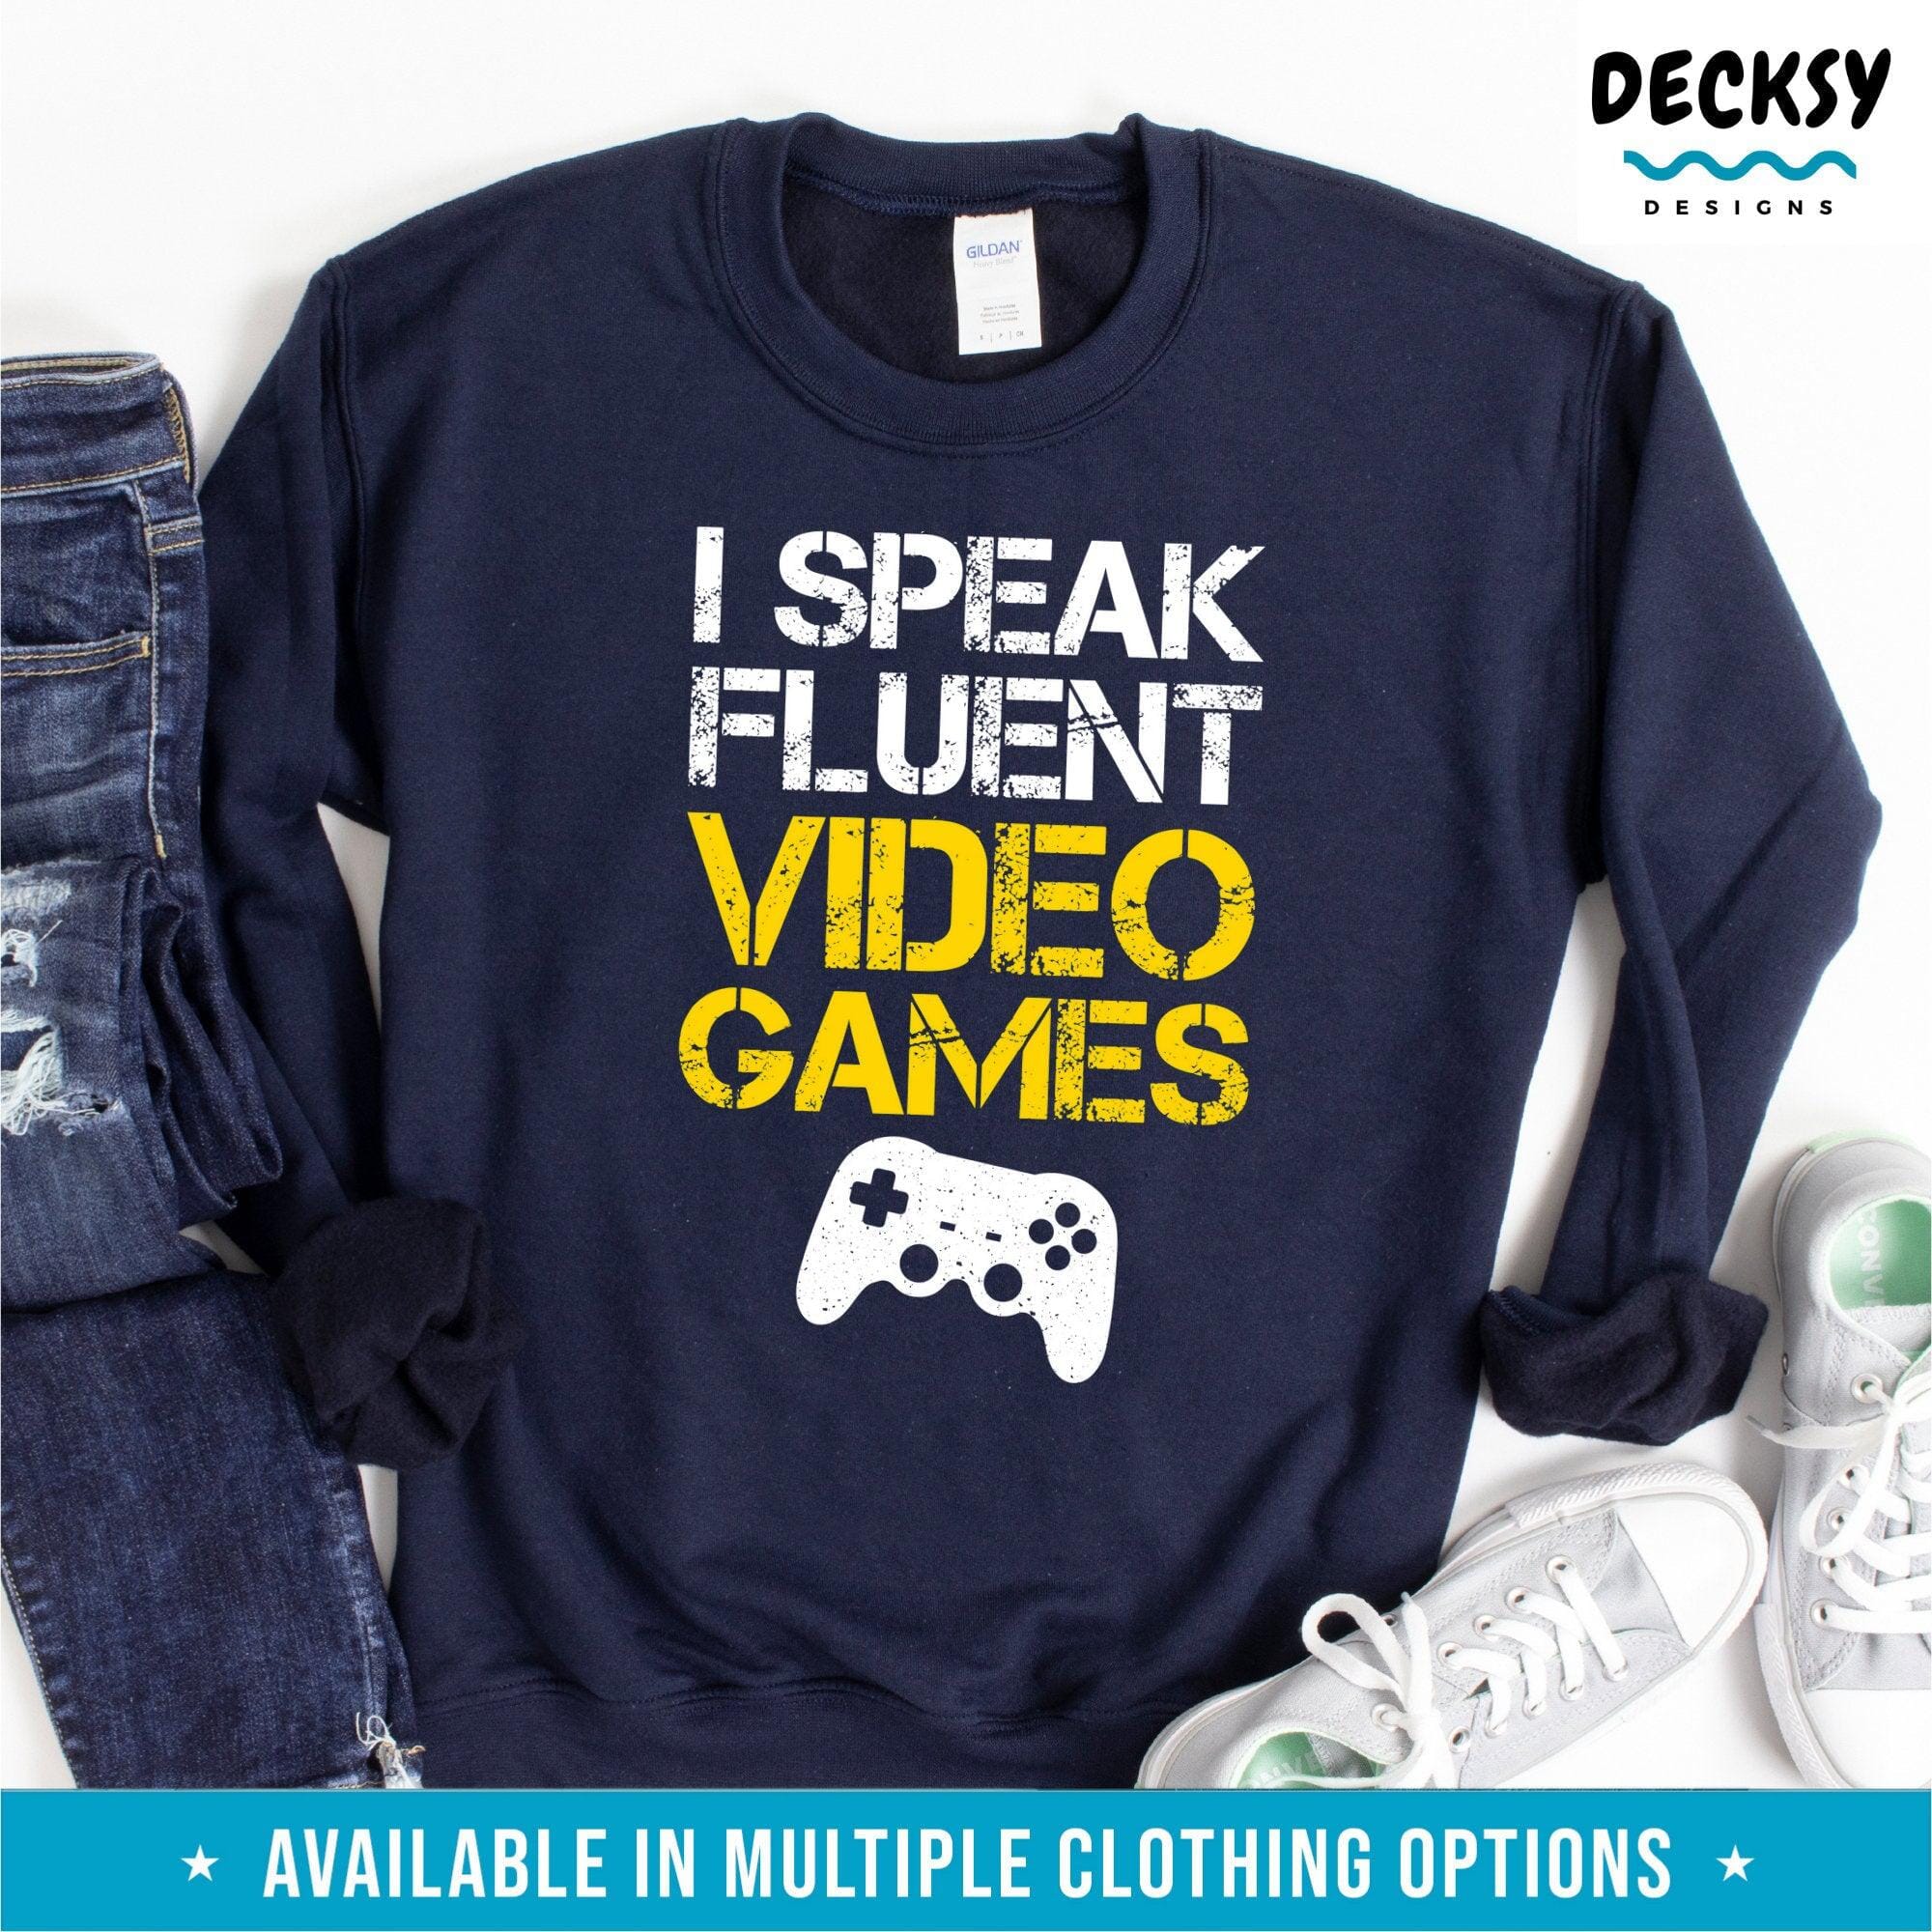 Gaming Shirt, Video Gamer Gift-Clothing:Gender-Neutral Adult Clothing:Tops & Tees:T-shirts:Graphic Tees-DecksyDesigns